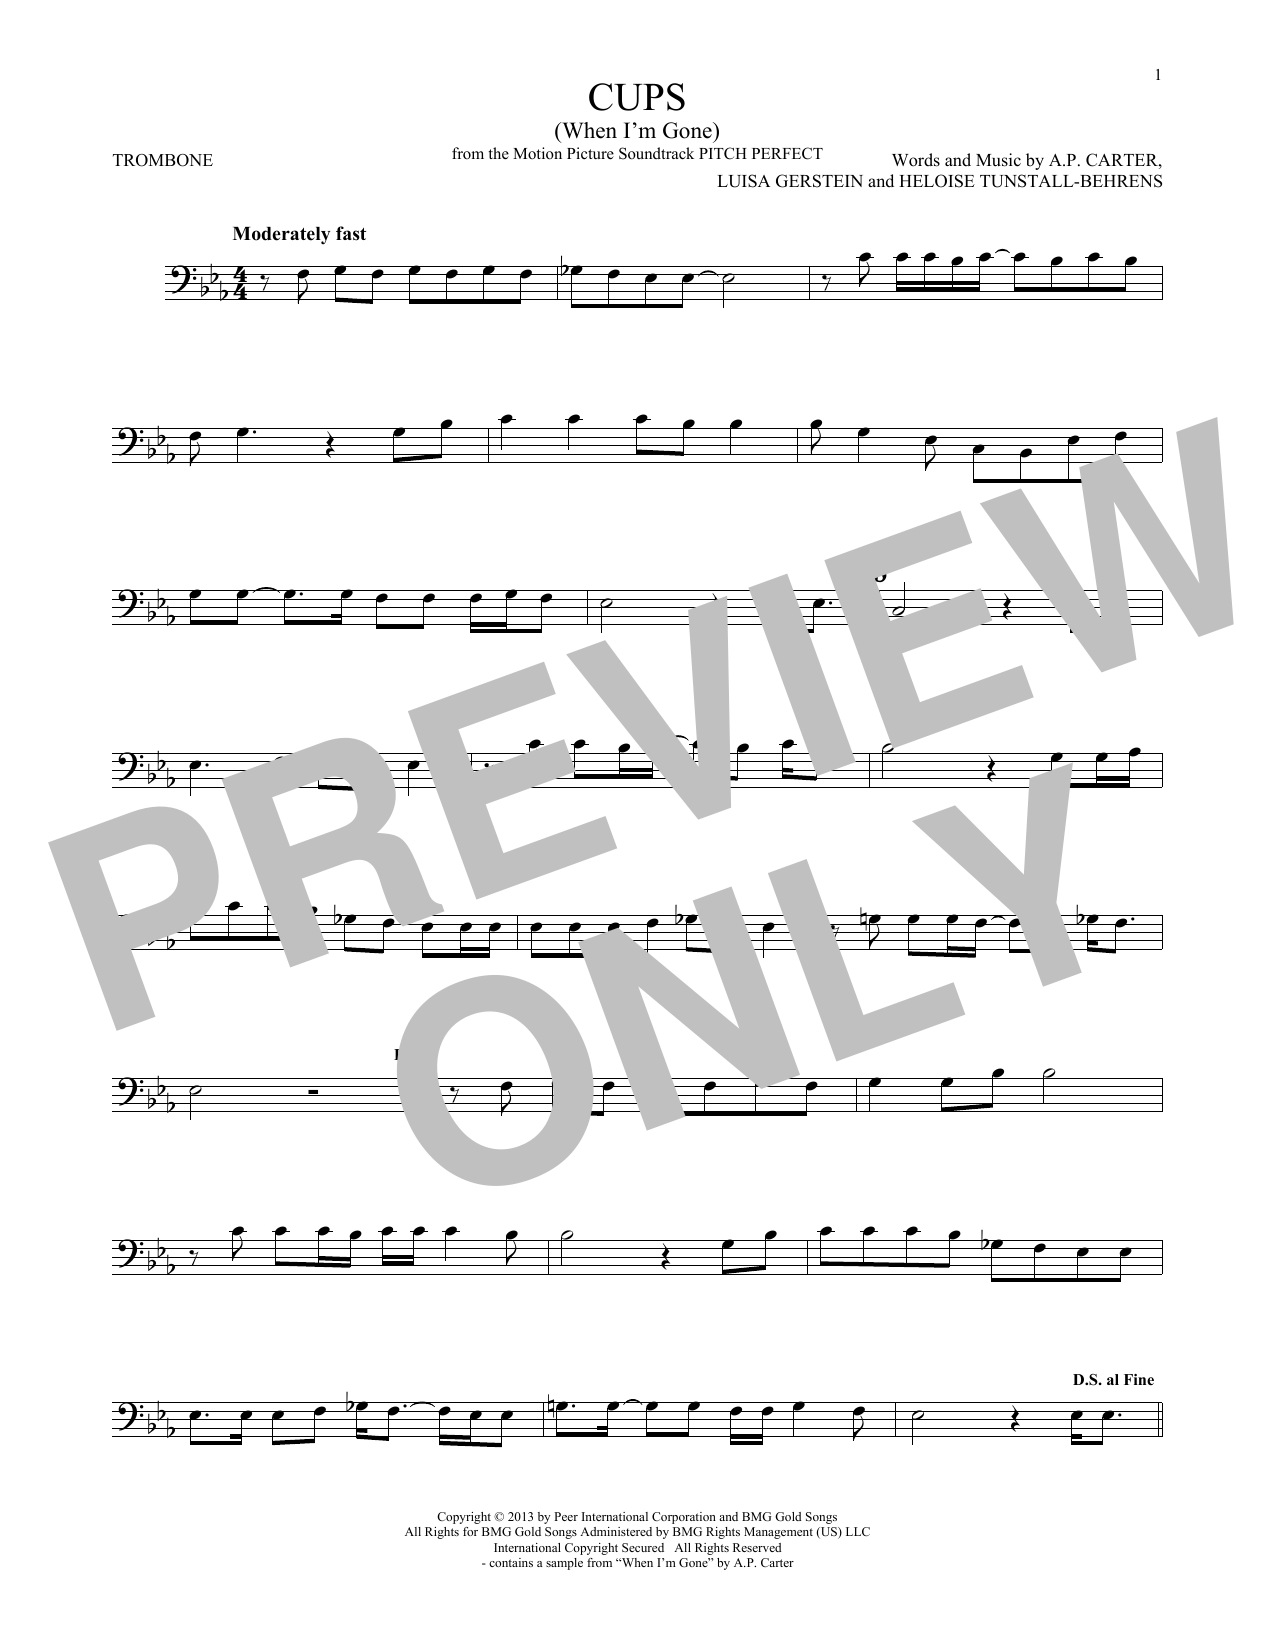 Download Anna Kendrick Cups (When I'm Gone) Sheet Music